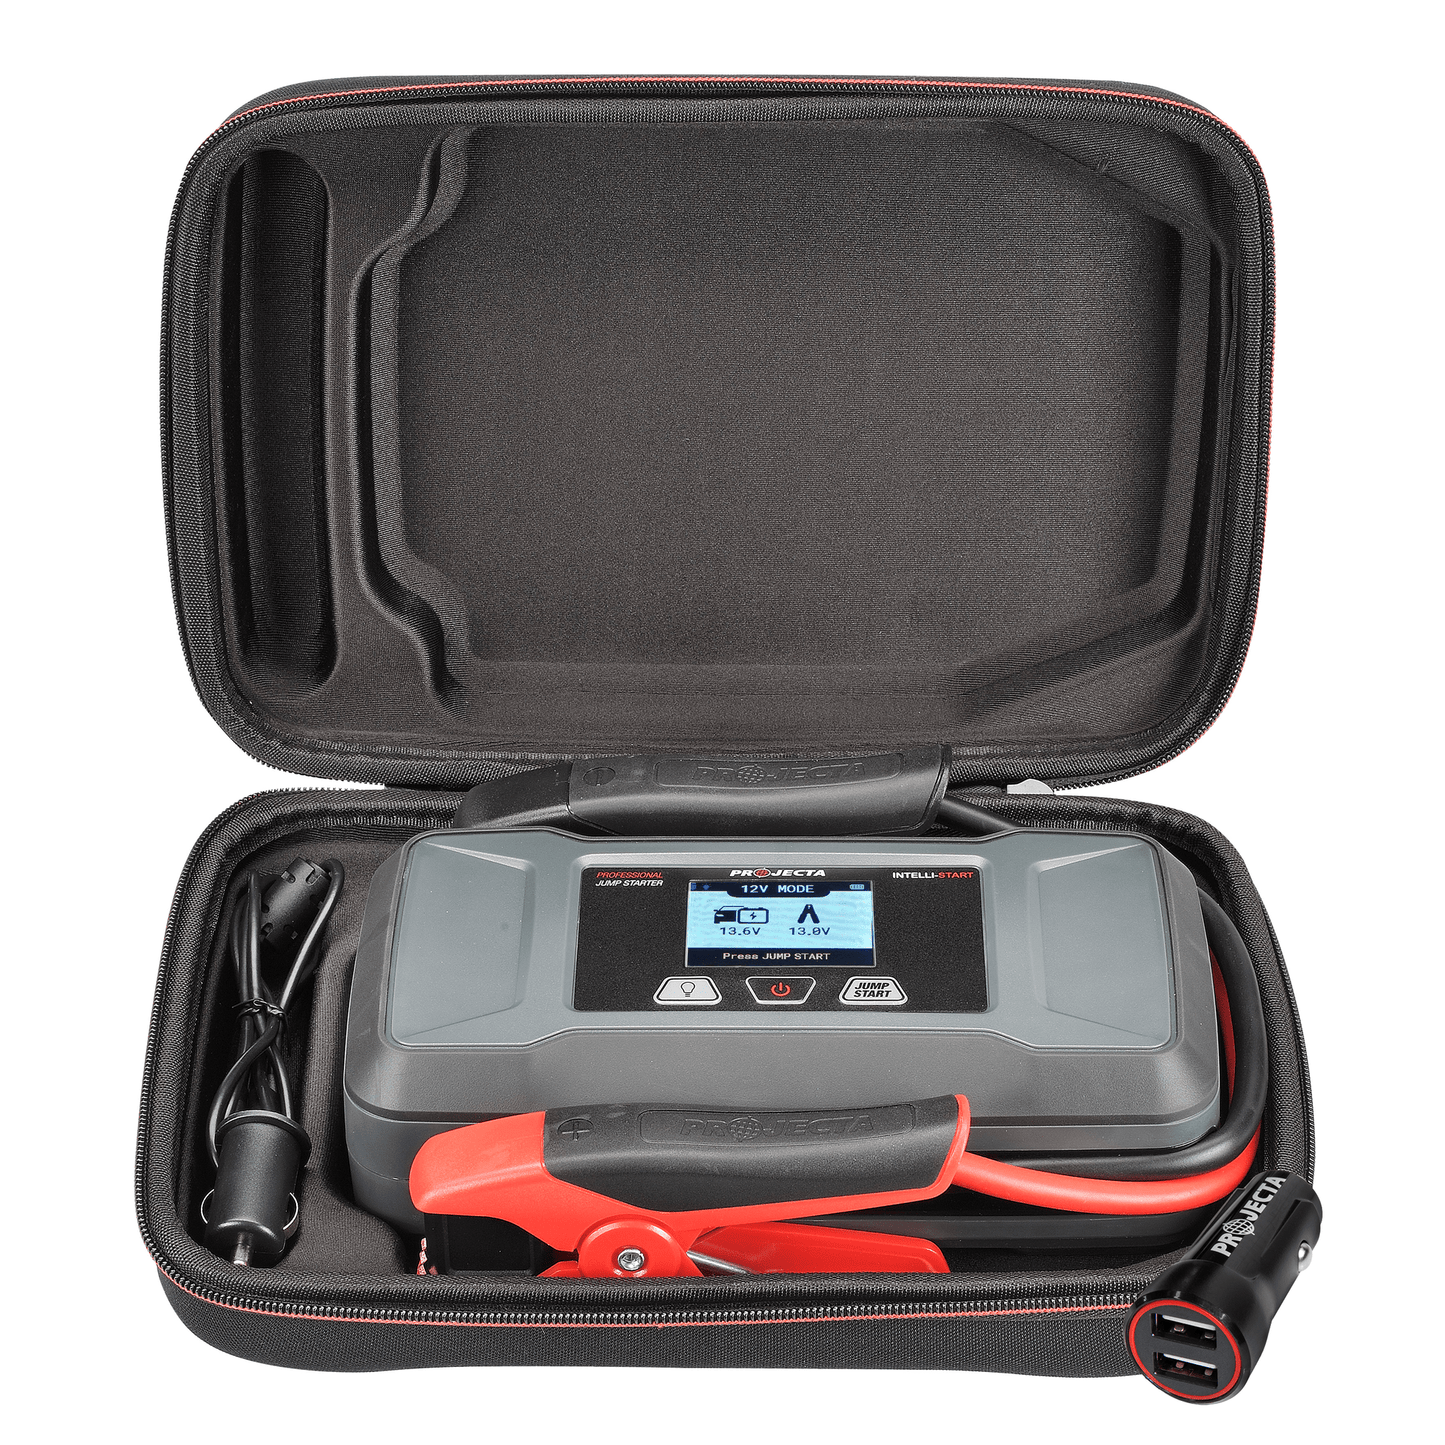 IS1400 - 12V 1400A Intelli-Start Professional Lithium Jump Starter and Power Bank